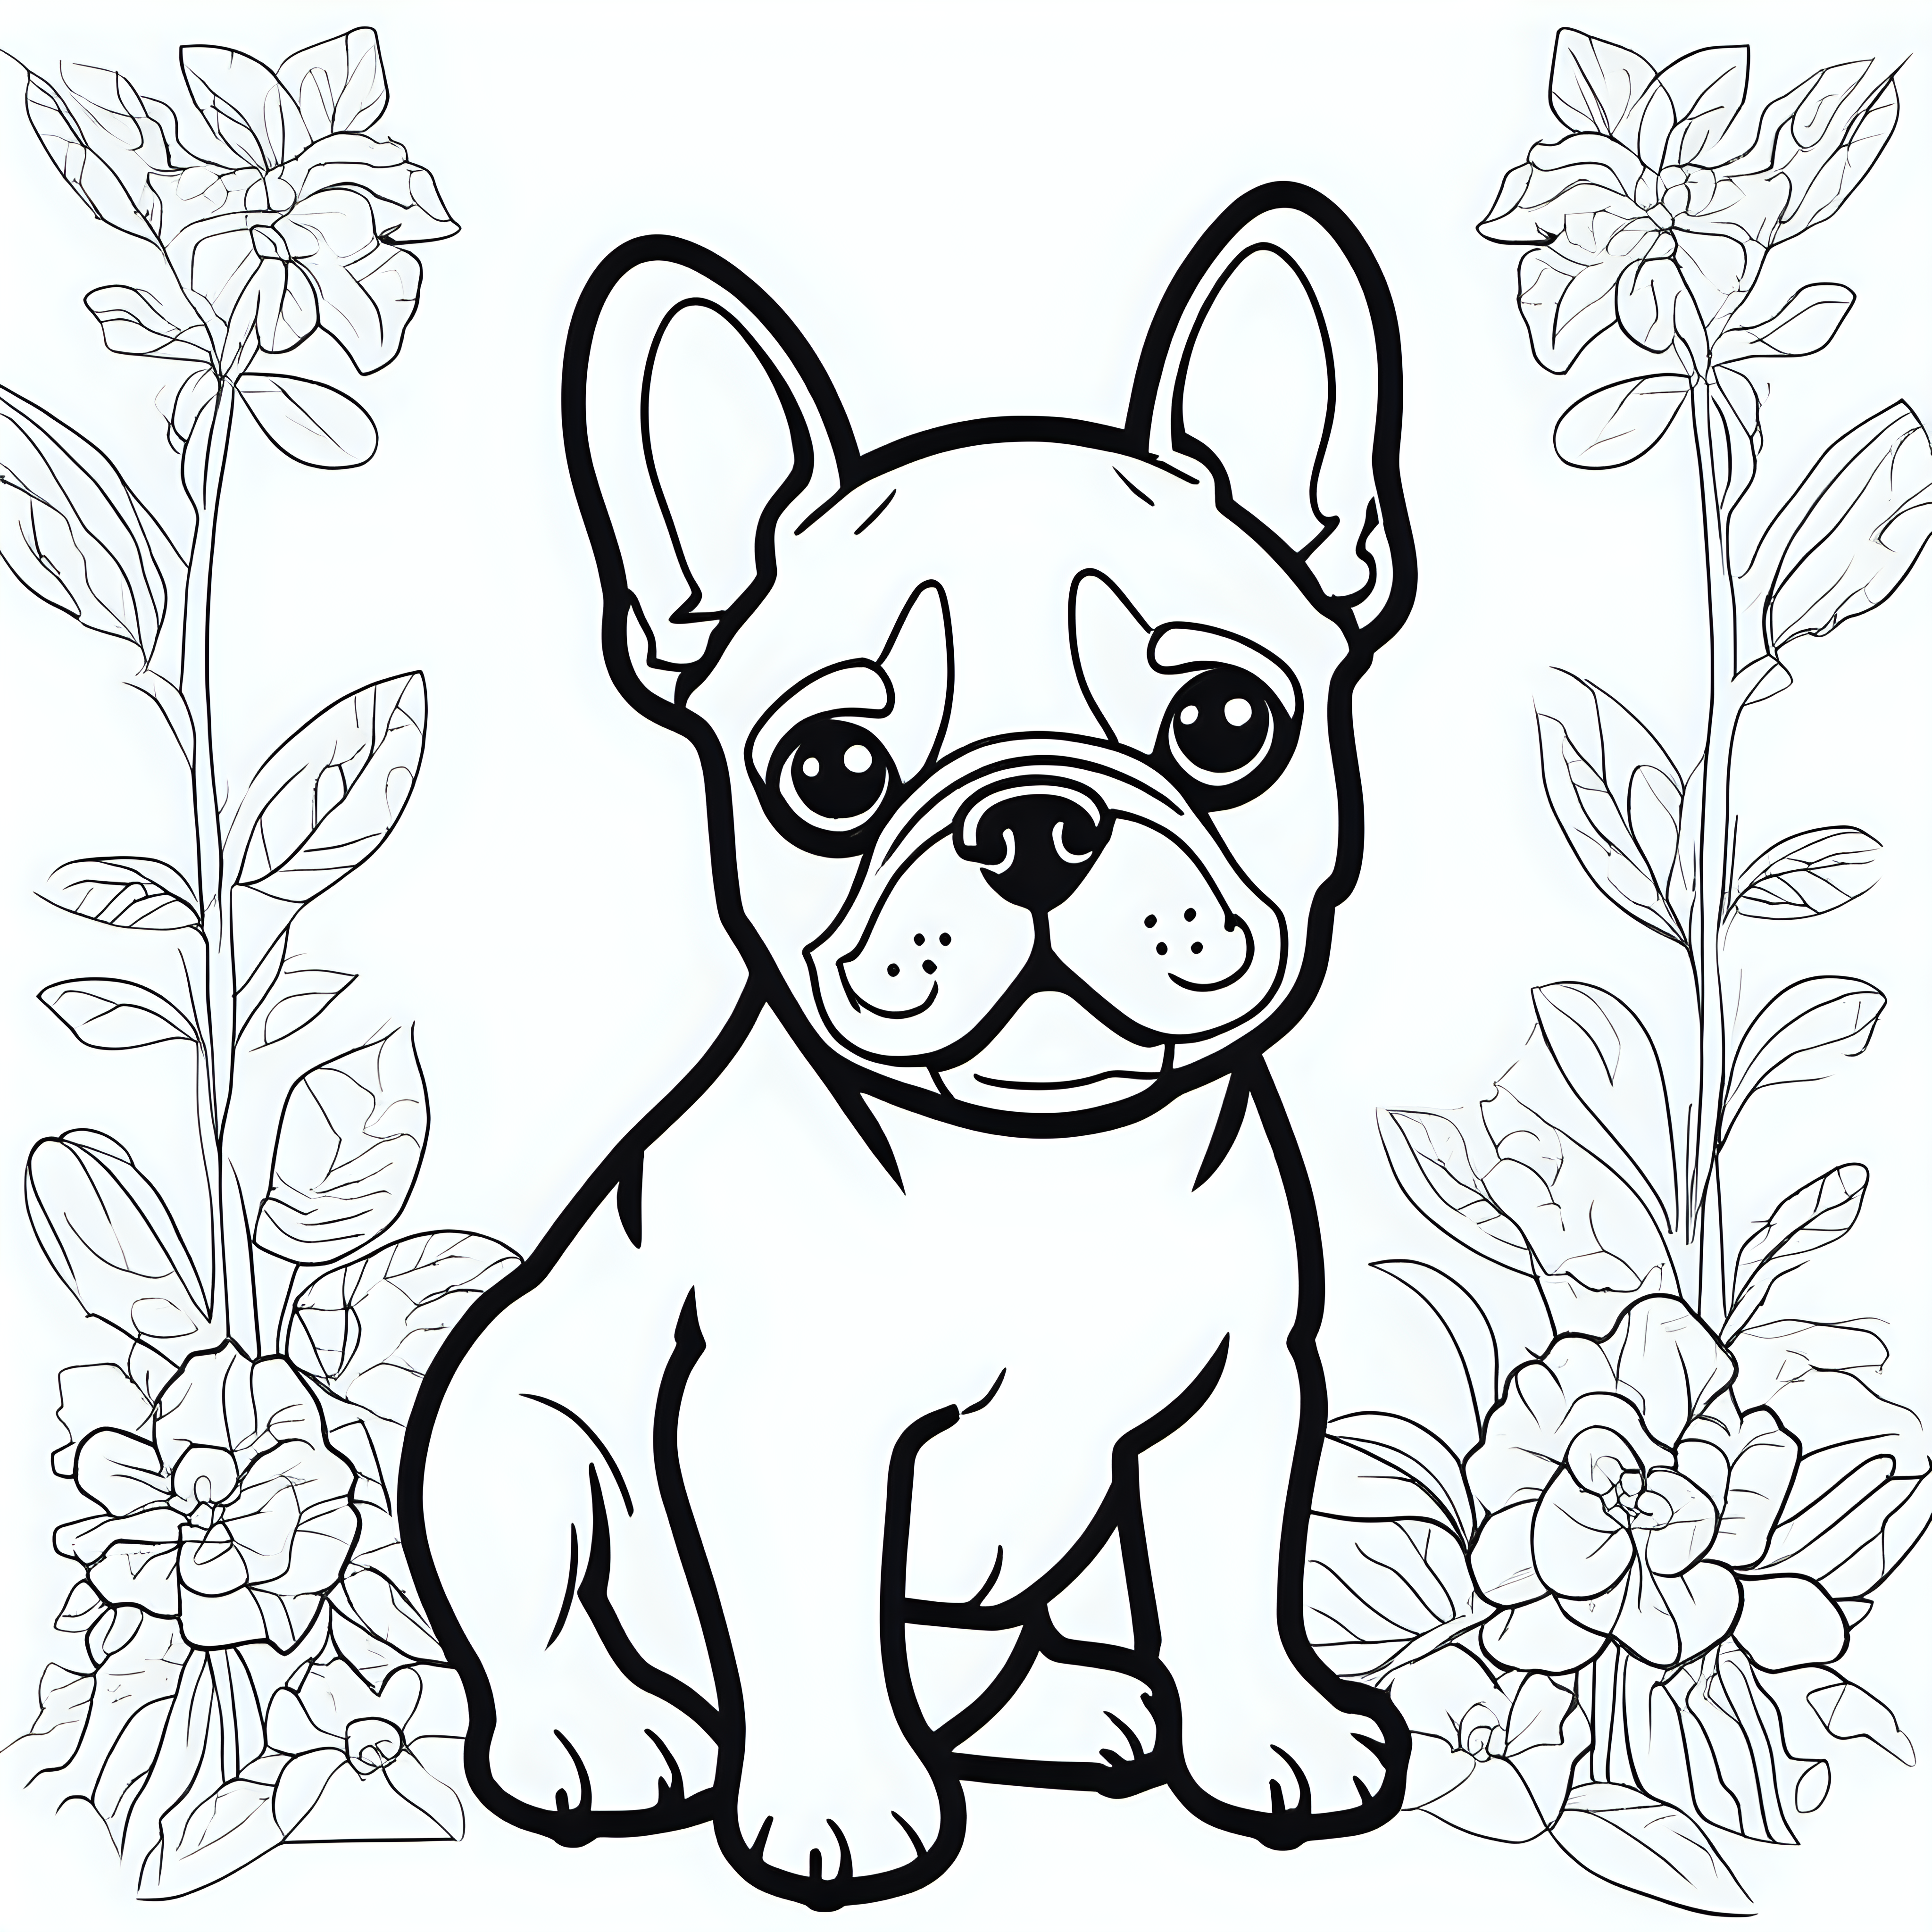 Craft a delightful black outline of a cute French Bulldog, exclusively designed for a children's coloring book. This charming illustration leaves ample space for kids to unleash their creativity and add vibrant colors, making the coloring experience both engaging and delightful.